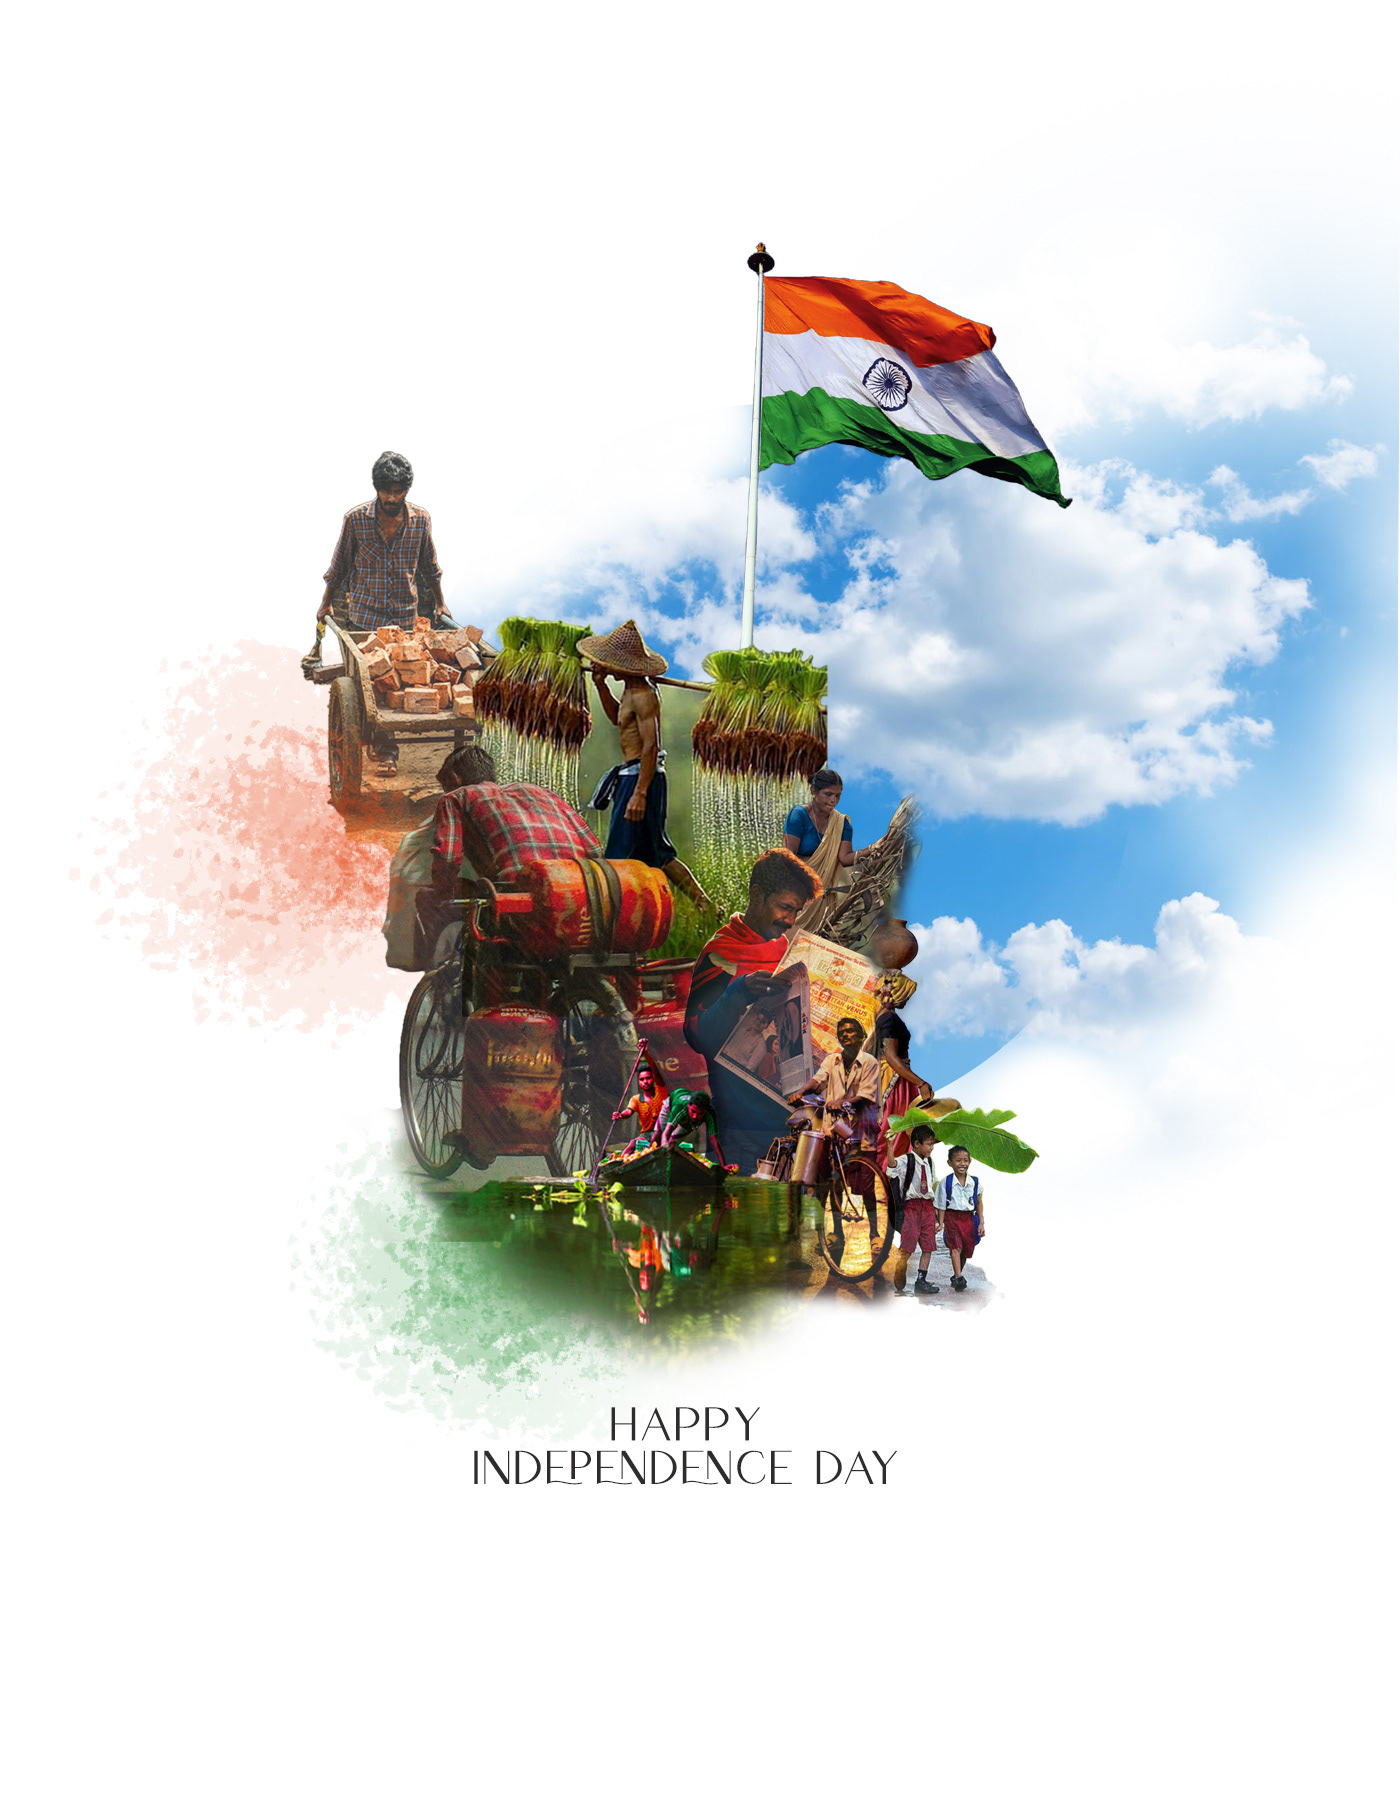 India independence day AUGUST15 Independenceday independence Day Poster independencedayposter